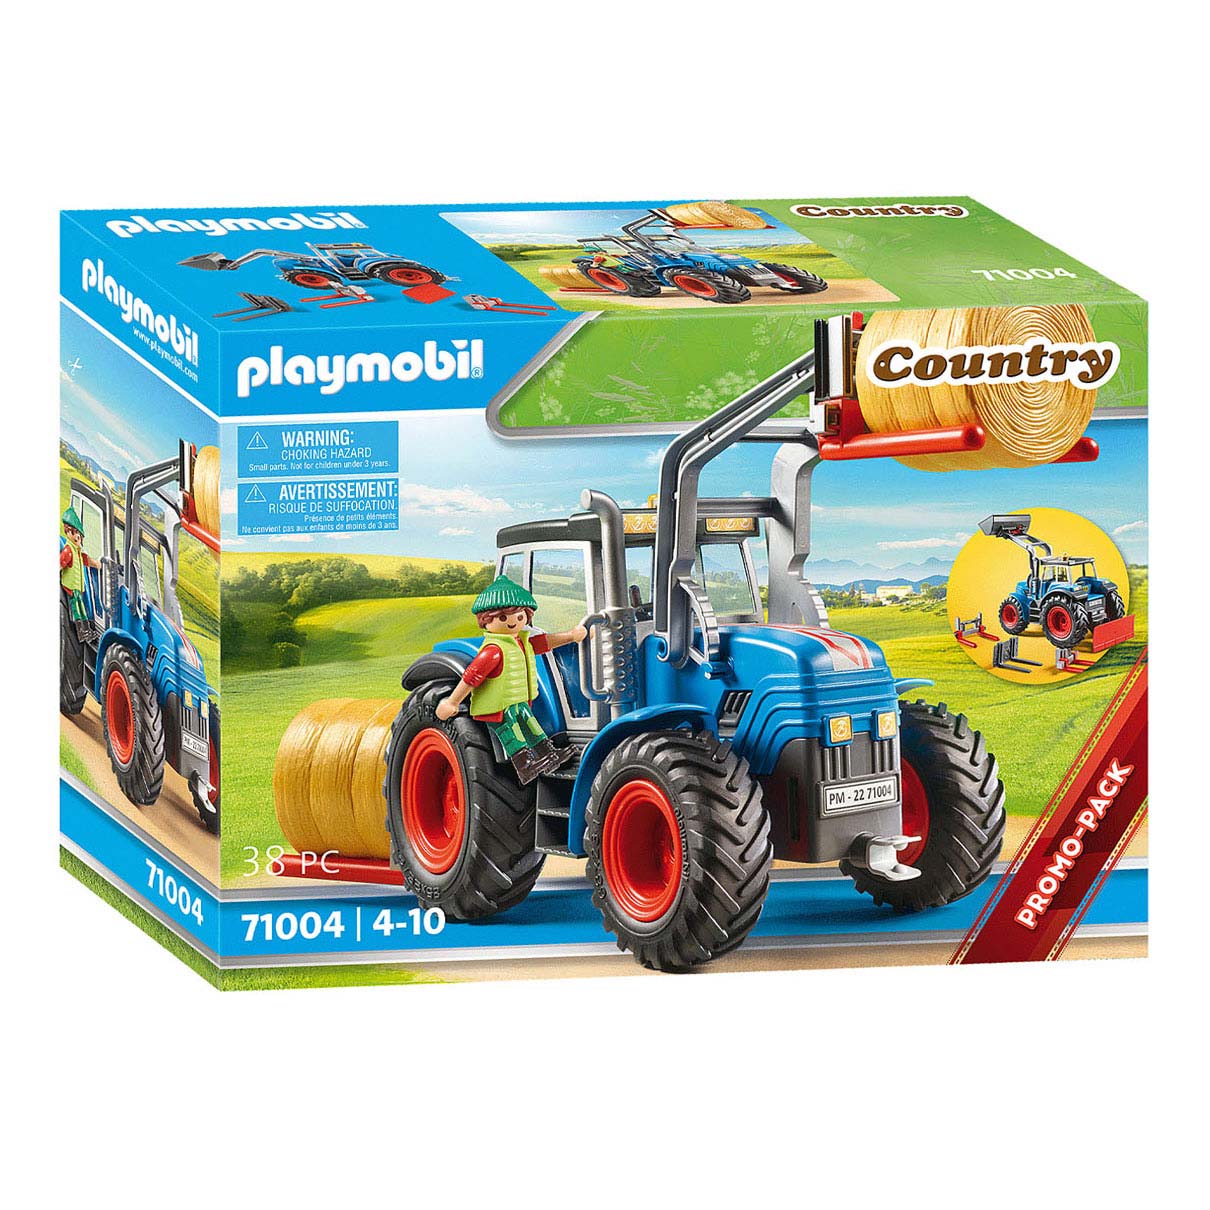 Playmobil Country Large Tractor With